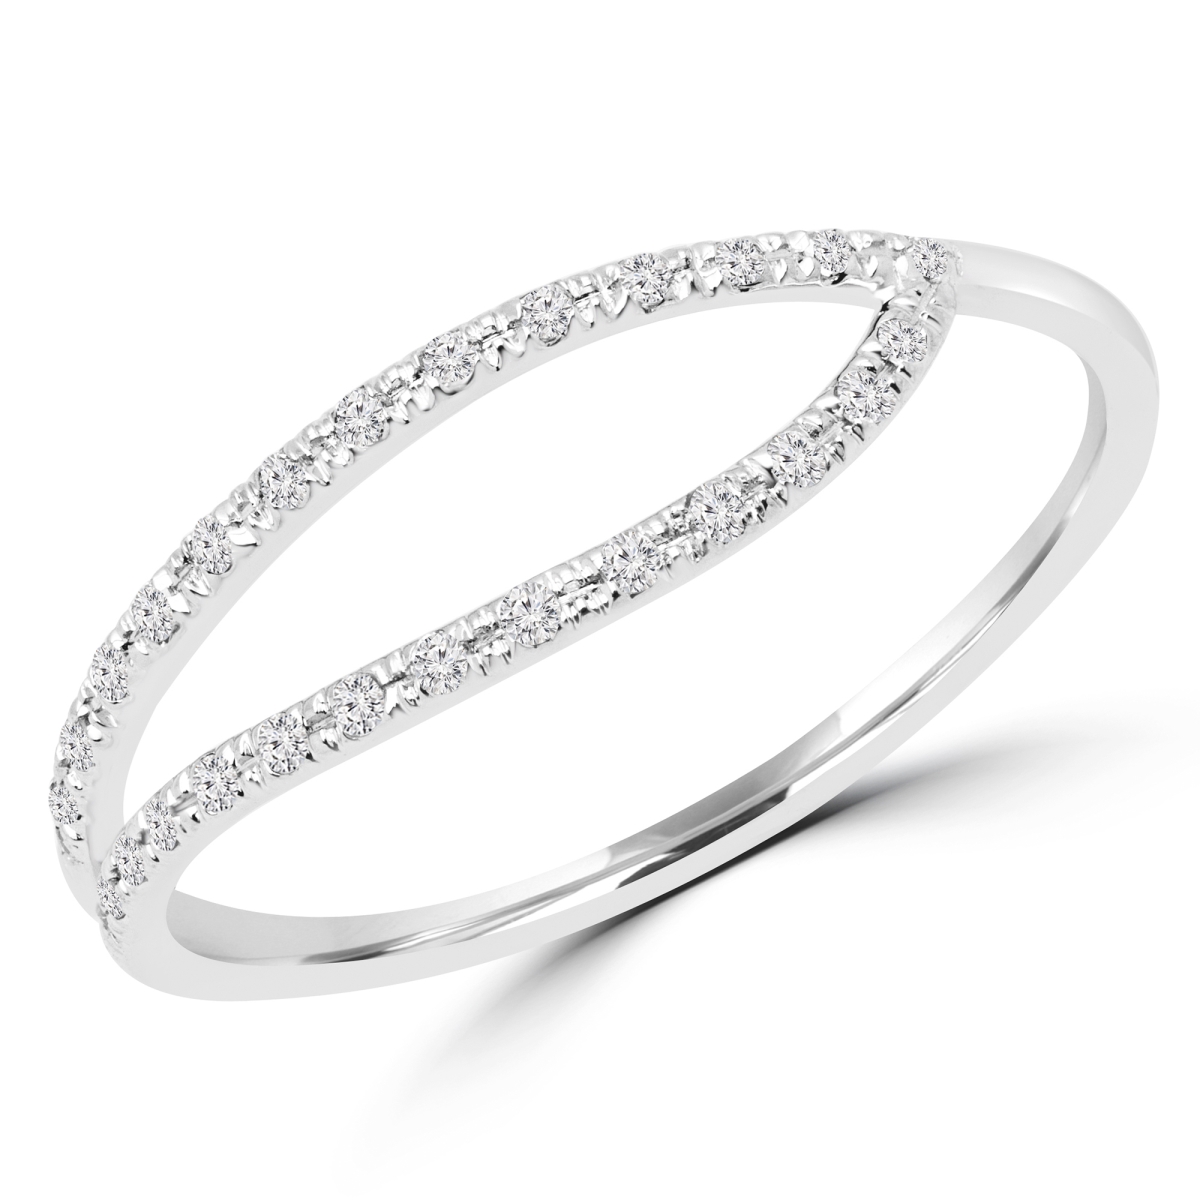 Picture of Majesty Diamonds MDR170056-8.75 0.1 CTW Round Diamond Cocktail Ring in 14K White Gold - 8.75